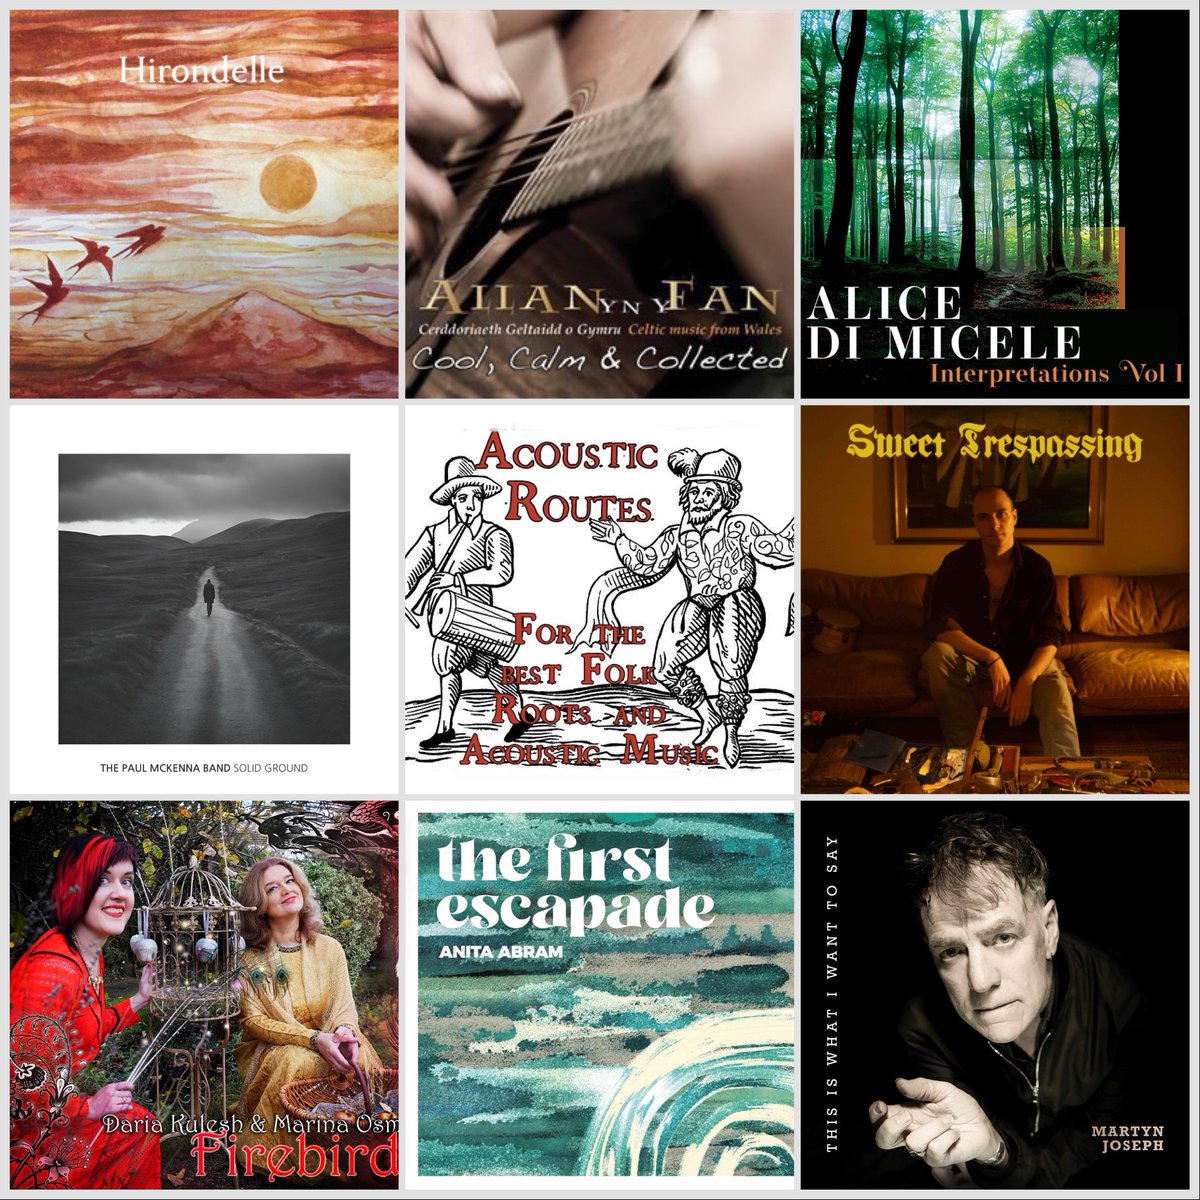 Coming up on @acousticroutes 478 Featured album from @martyn_joseph & tracks from @DariaKulesh @AliceDiMicele @paulmckennaband @AllanYnYFan and more. Tune in to @BluesRootsRadio Thursday 7pm 🏴󠁧󠁢󠁷󠁬󠁳󠁿🇬🇧time, repeated Friday 1:30pm bluesandrootsradio.com